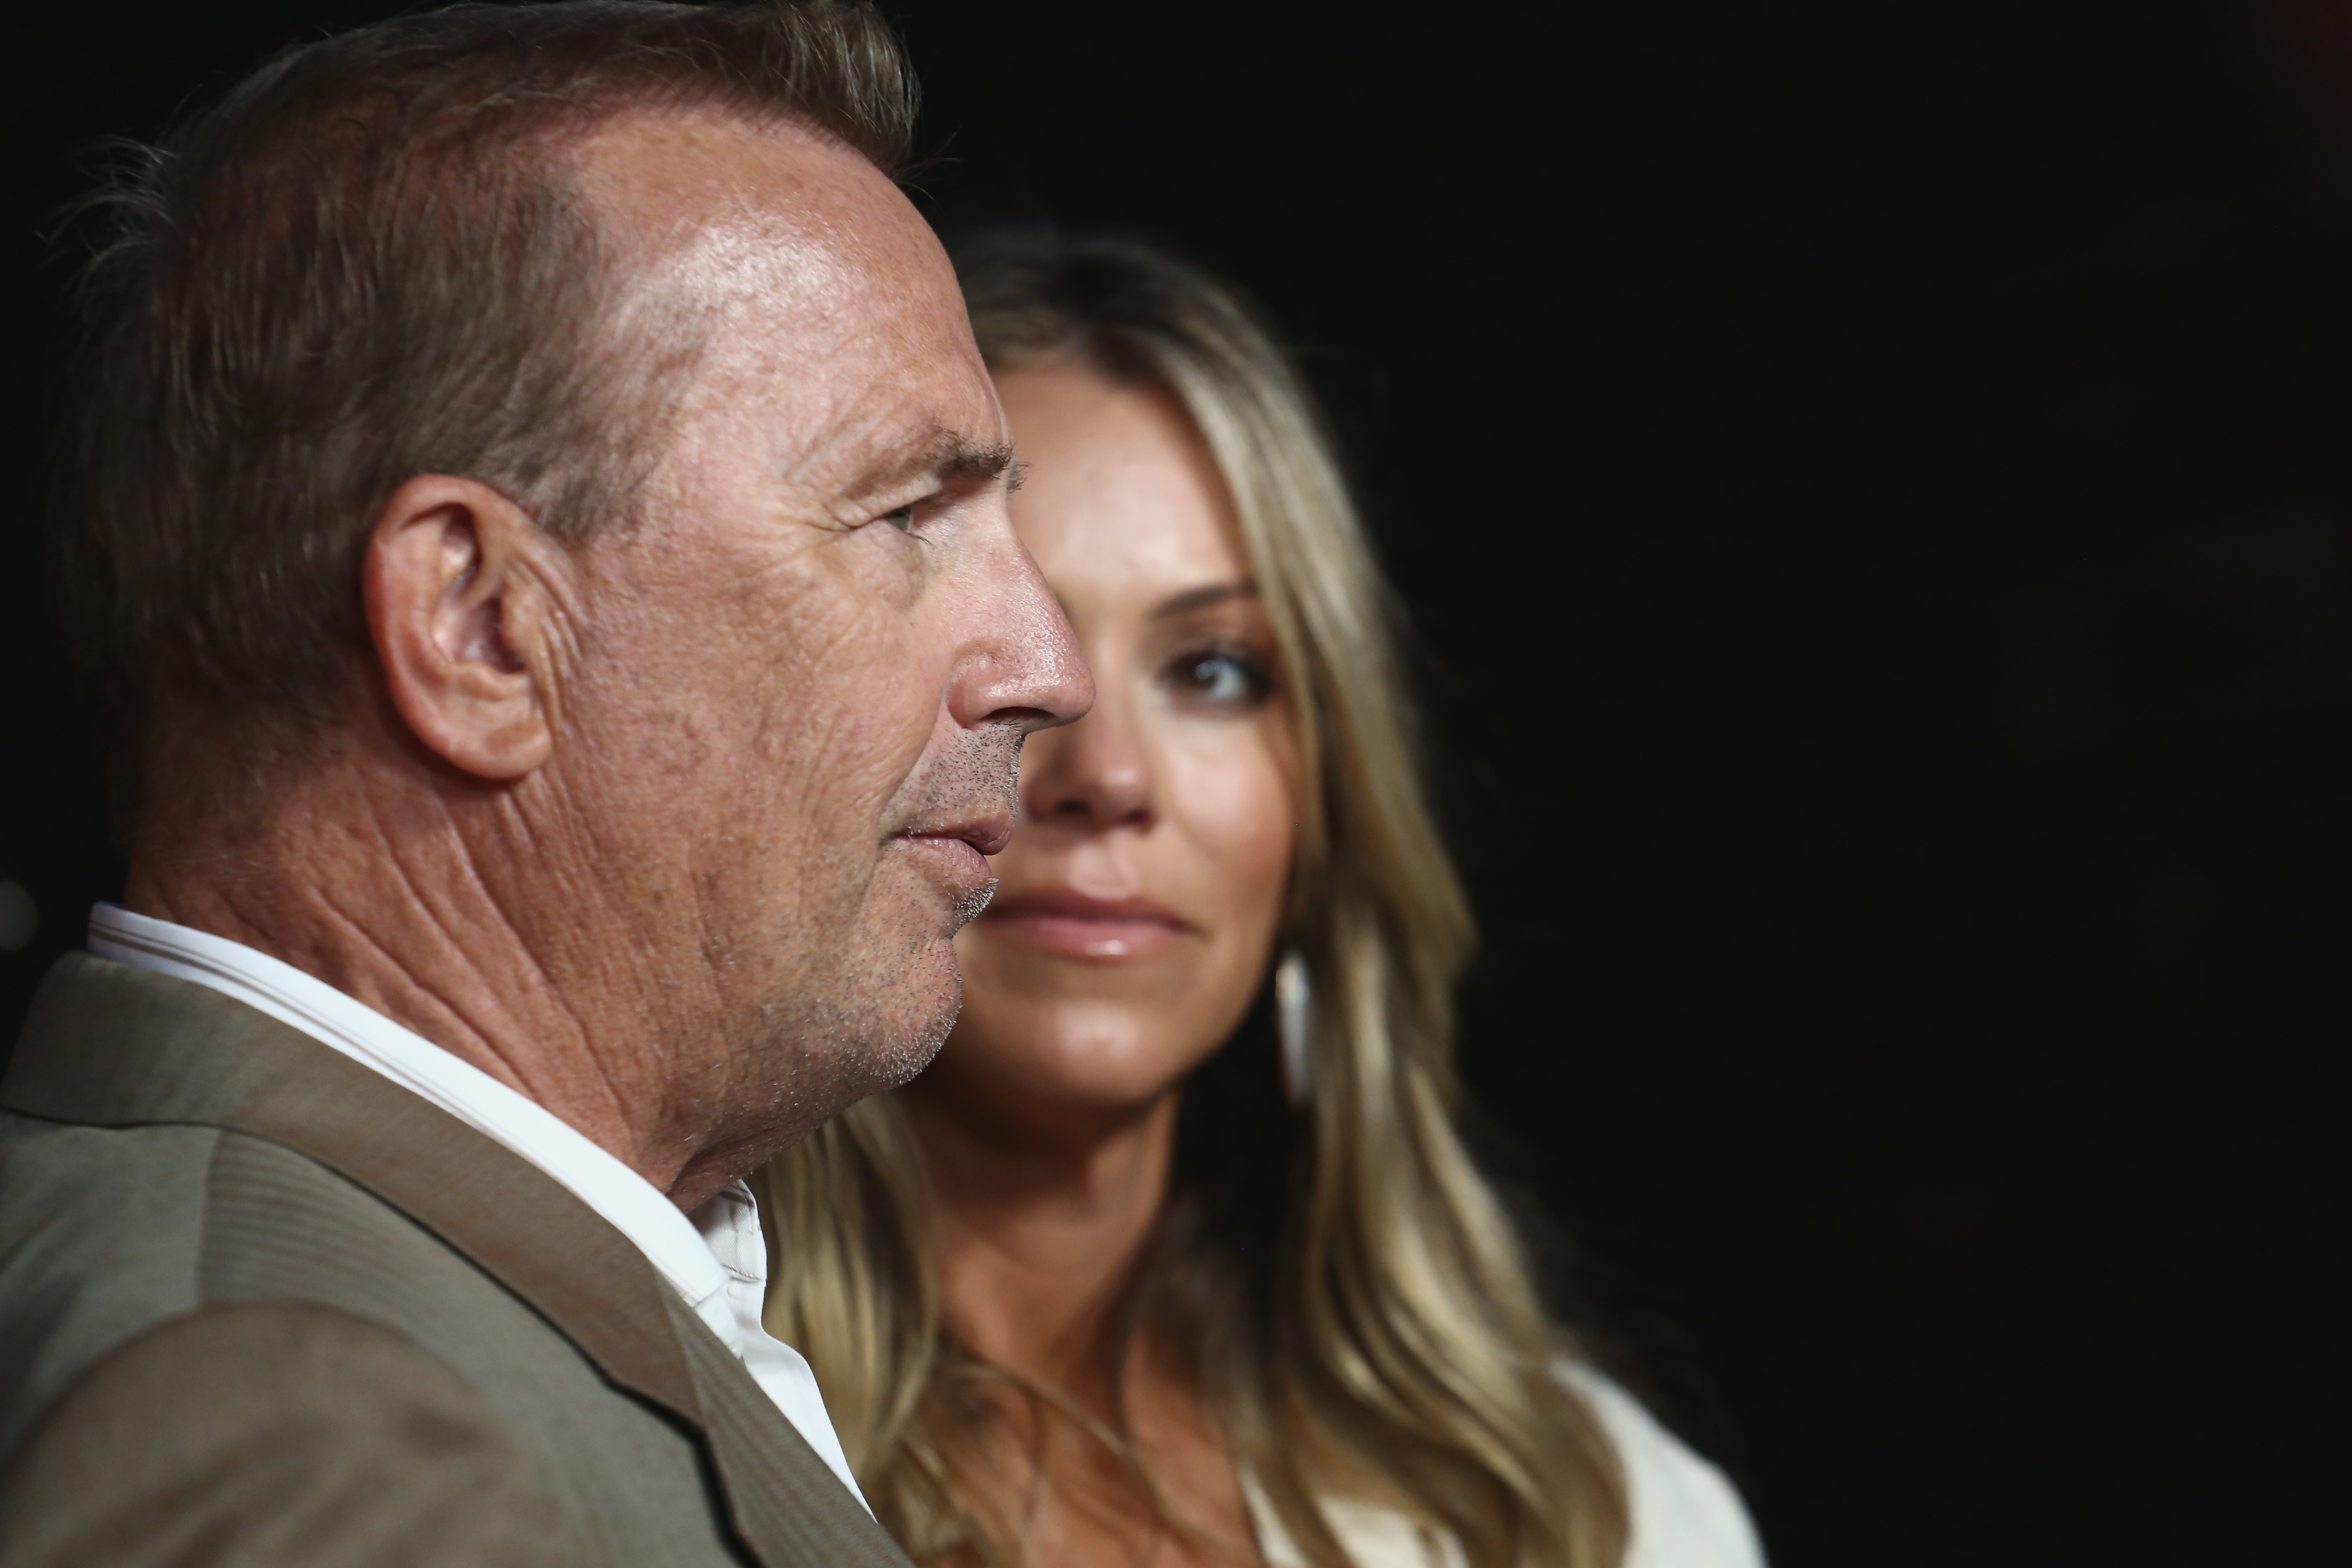 Kevin Costner and Christine Baumgartner at the premiere party for "Yellowstone" Season 2 on May 30, 2019, in Los Angeles, California | Source: Getty Images